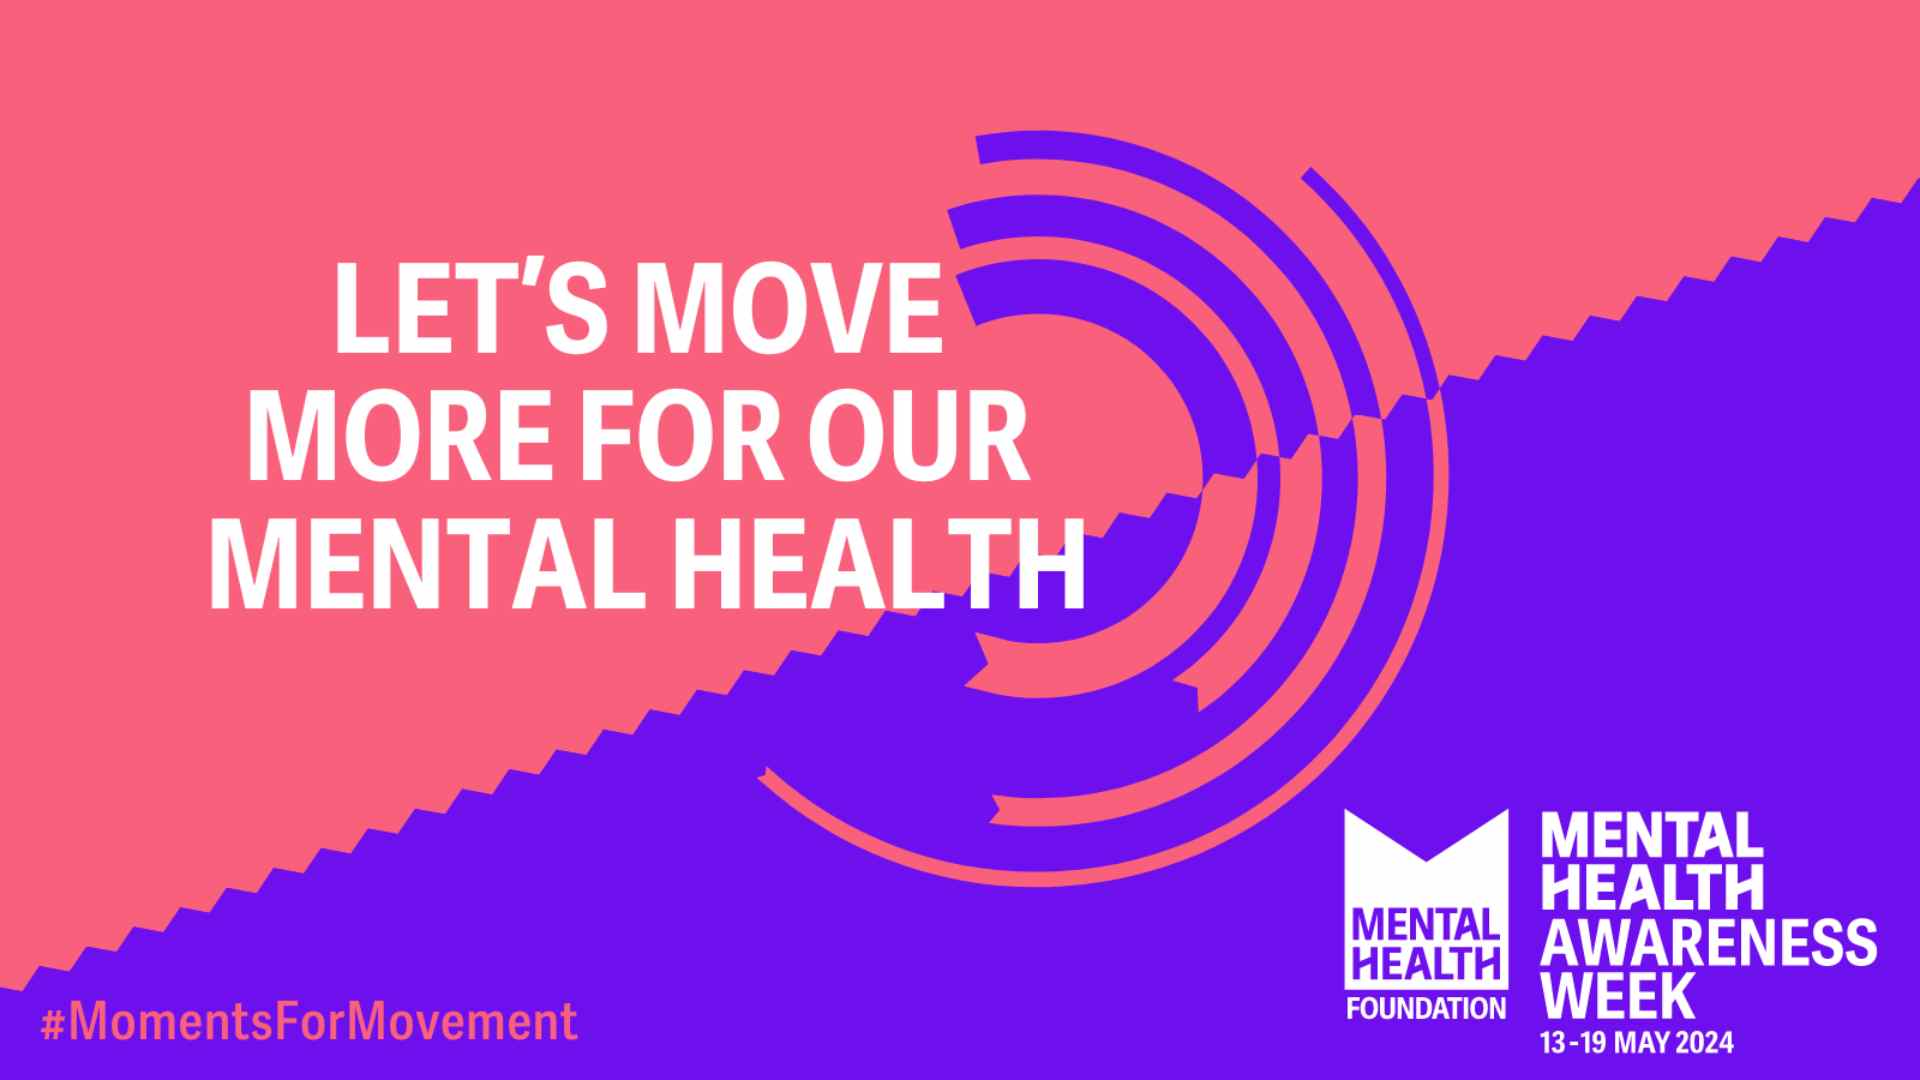 The Mental Health Foundation Logo Mental Health Awareness Week 13 - 19 May 2024 Lets Move More For Our Mental Health  #MomentsForMovement